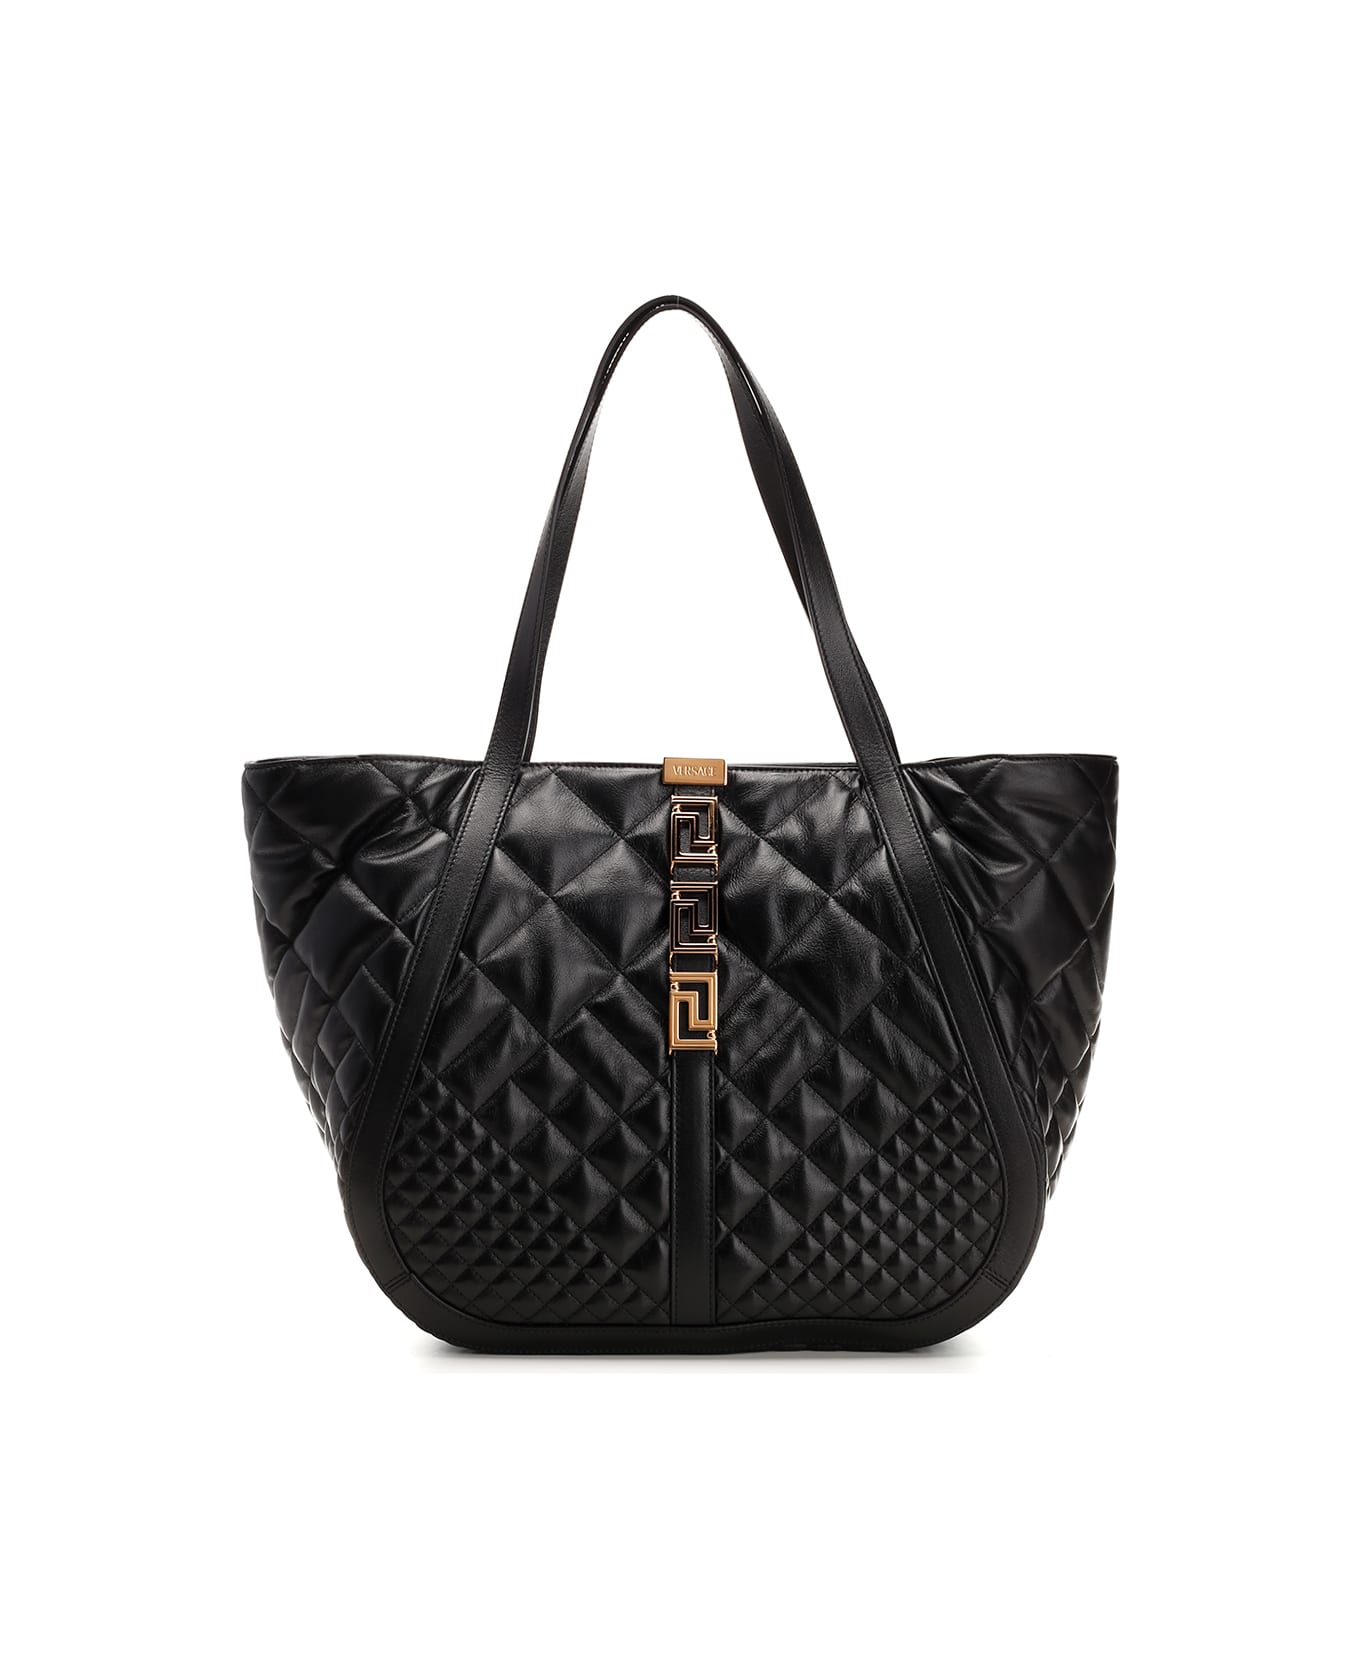 Versace Quilted Leather Tote - black トートバッグ